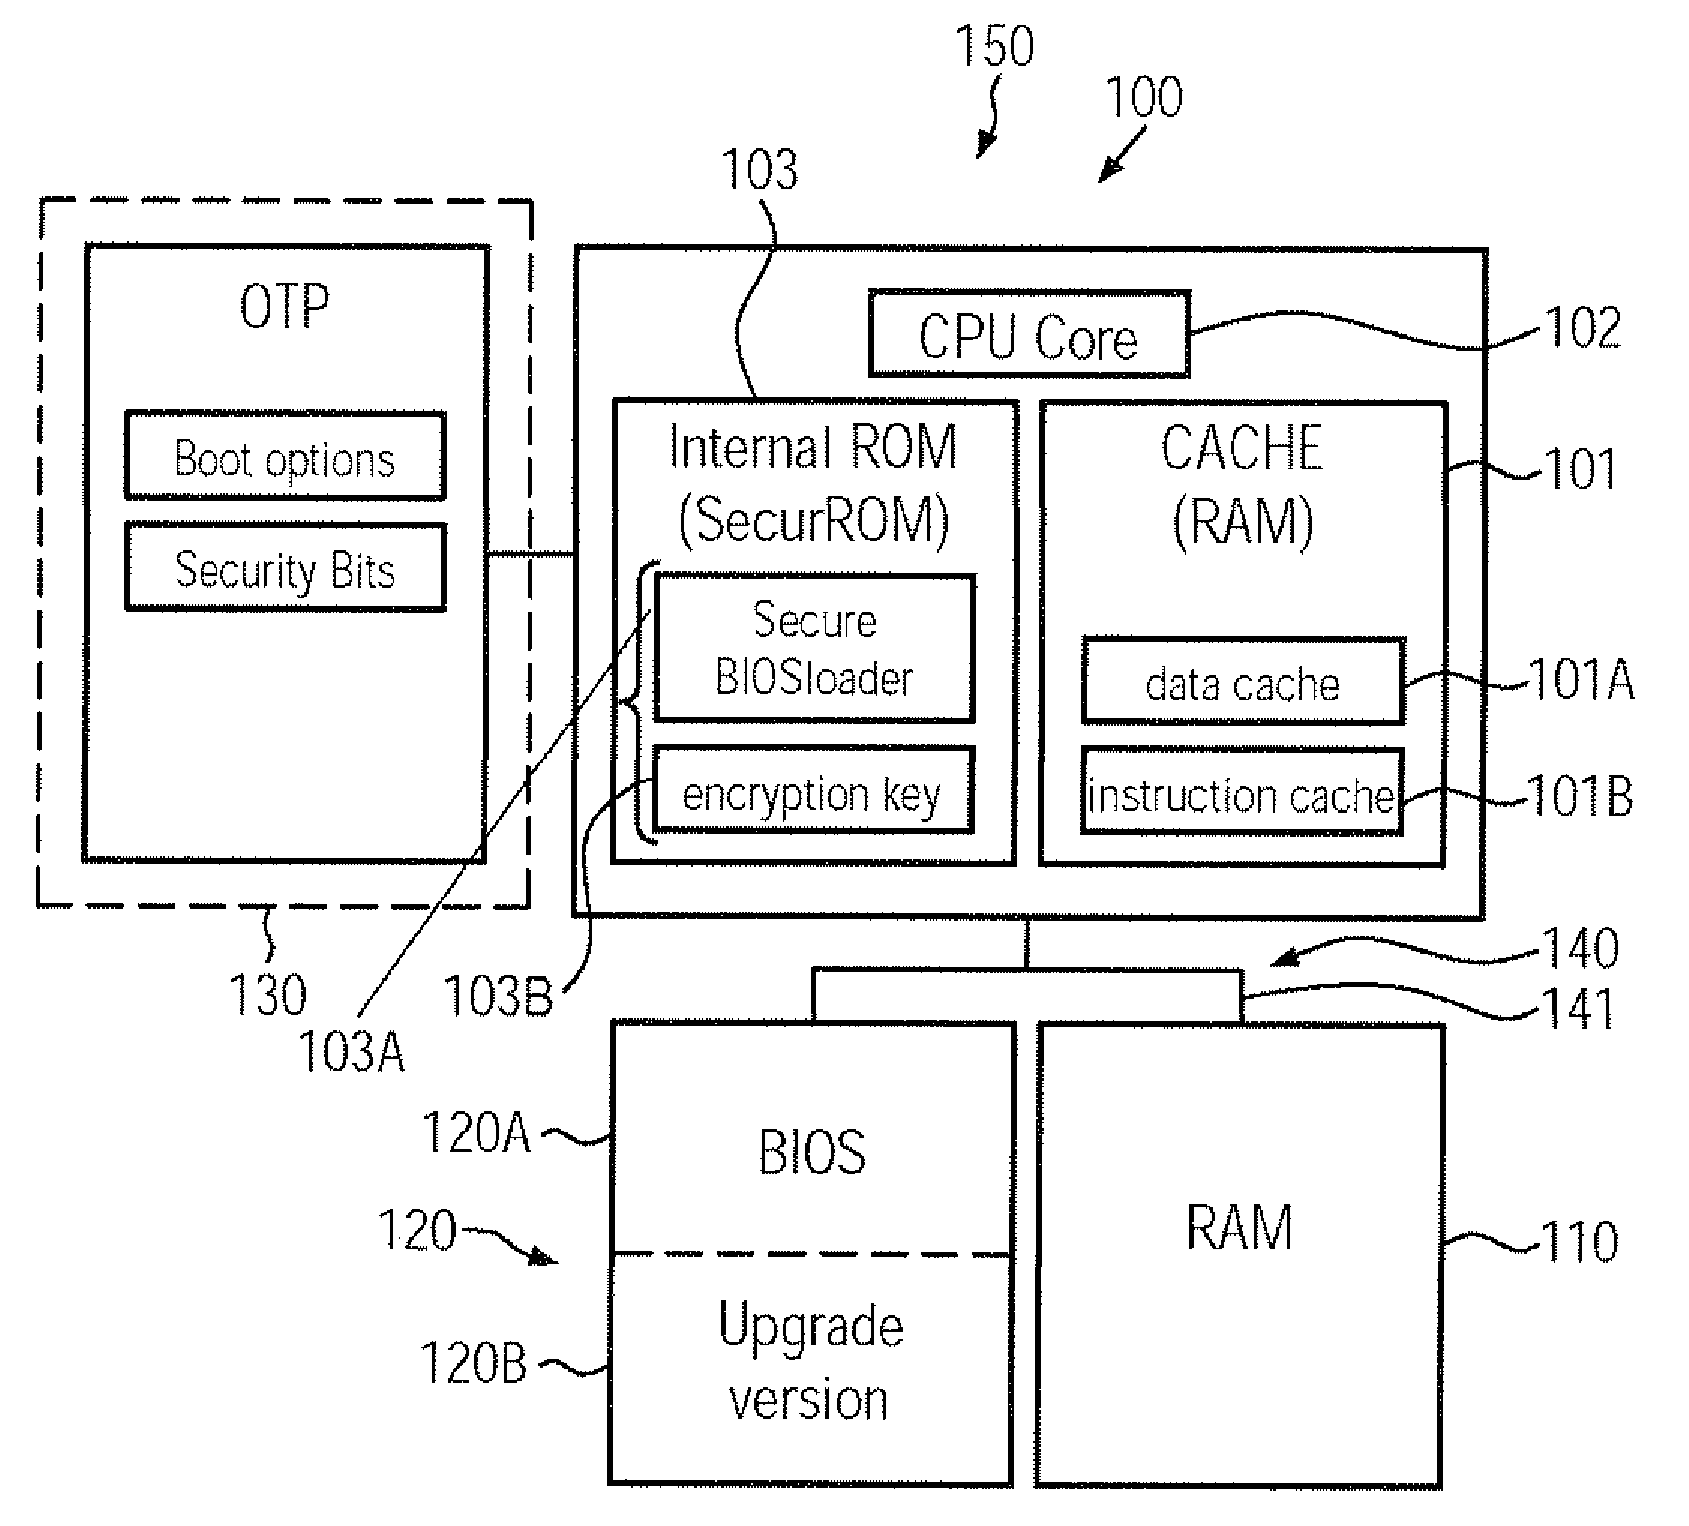 Computer system comprising a secure boot mechanism on the basis of symmetric key encryption